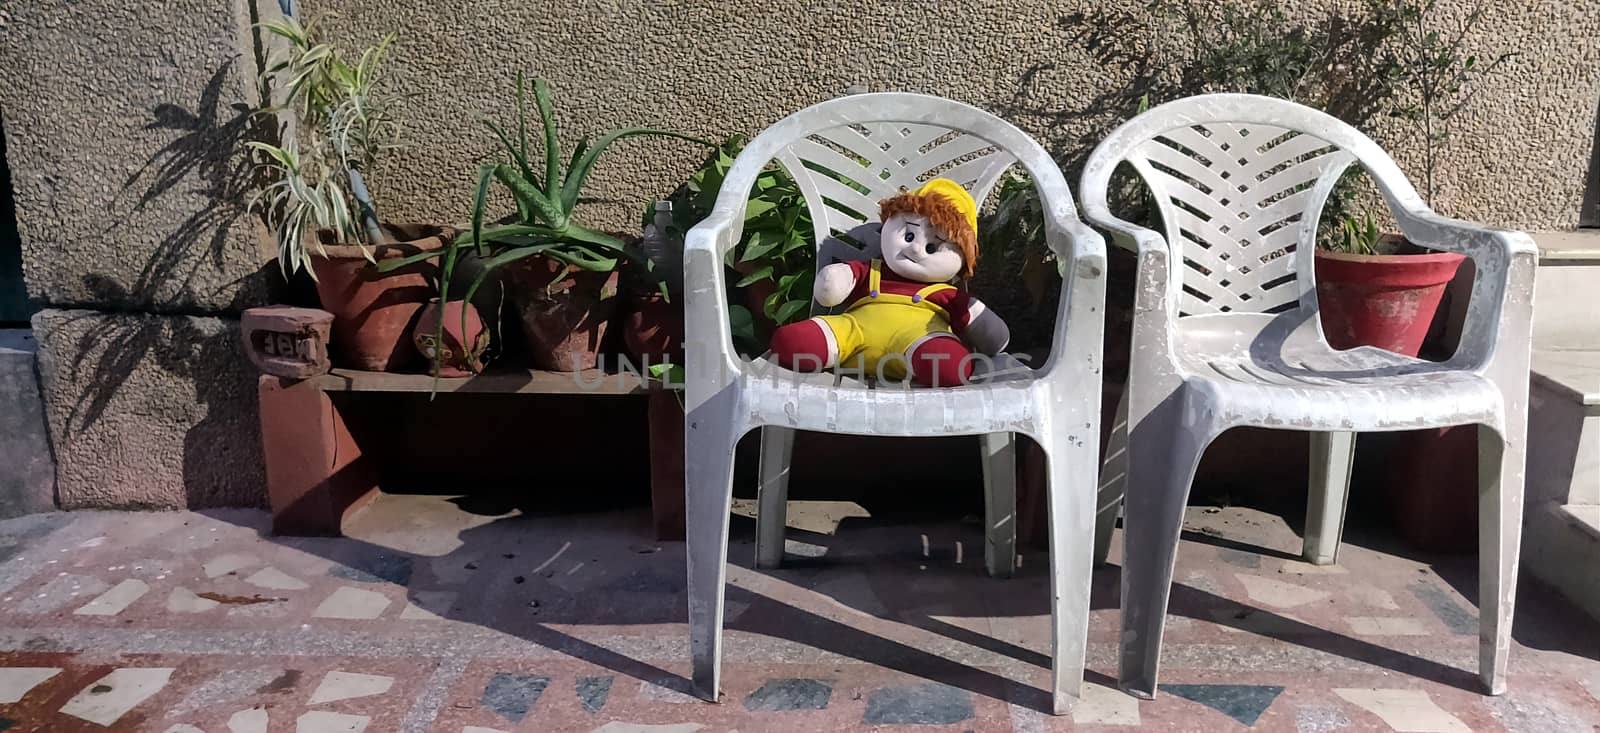 A stuffed doll sitting on a plastic chair alone in backyard in India by mshivangi92